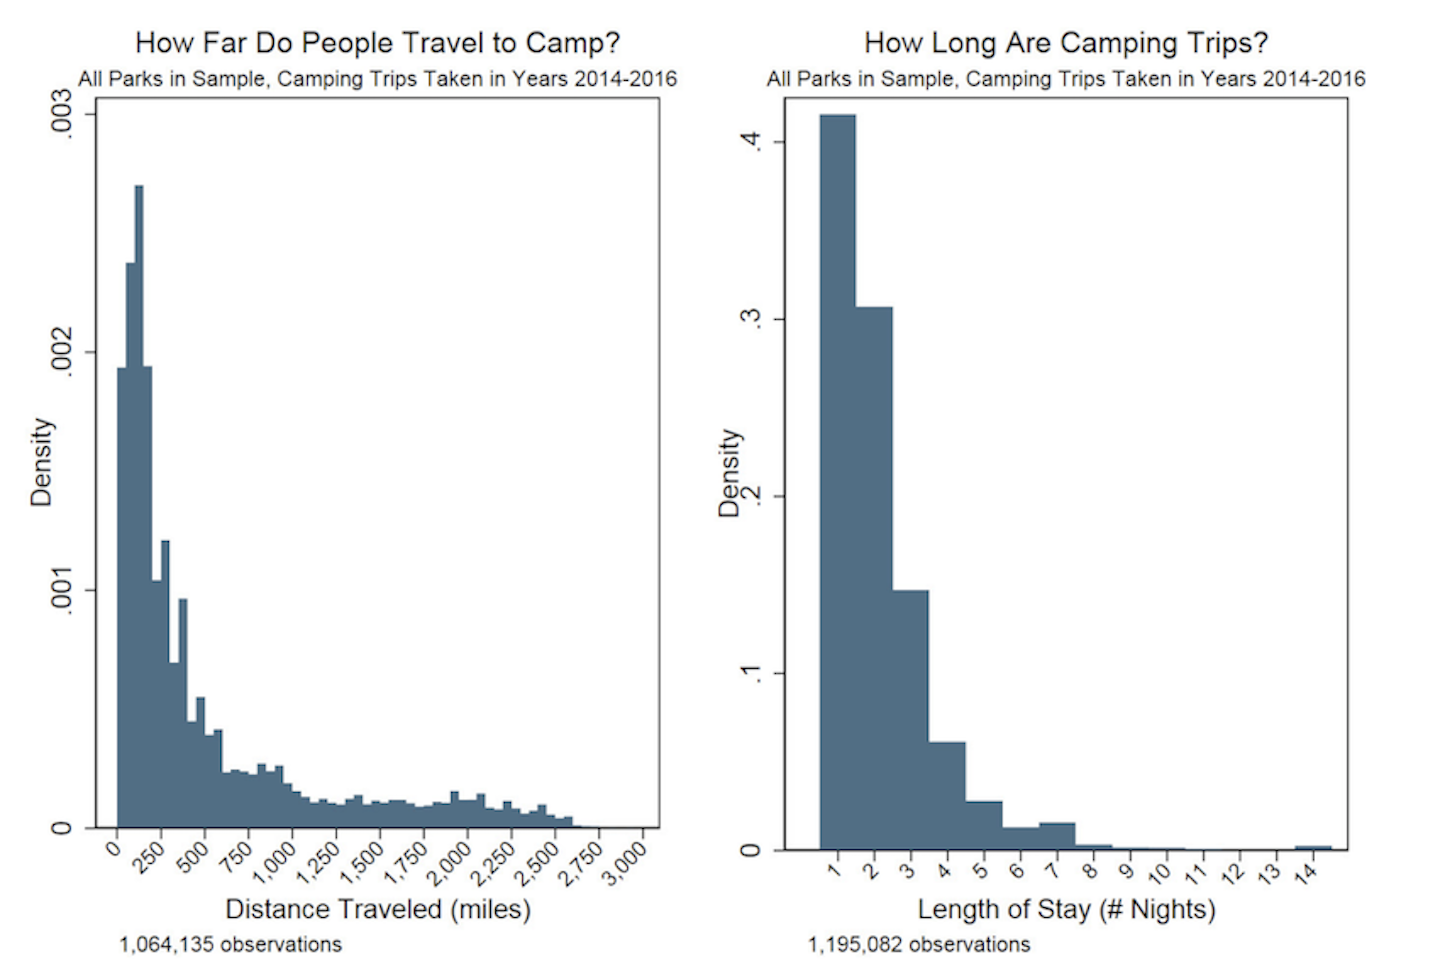 Reproduced from @Walls2018. Distance traveled and duration of stay for National Park camping visits from 2014 to 2016. Visitors tend to visit national parks near their homes and stay only two nights, and longer trips are rare.